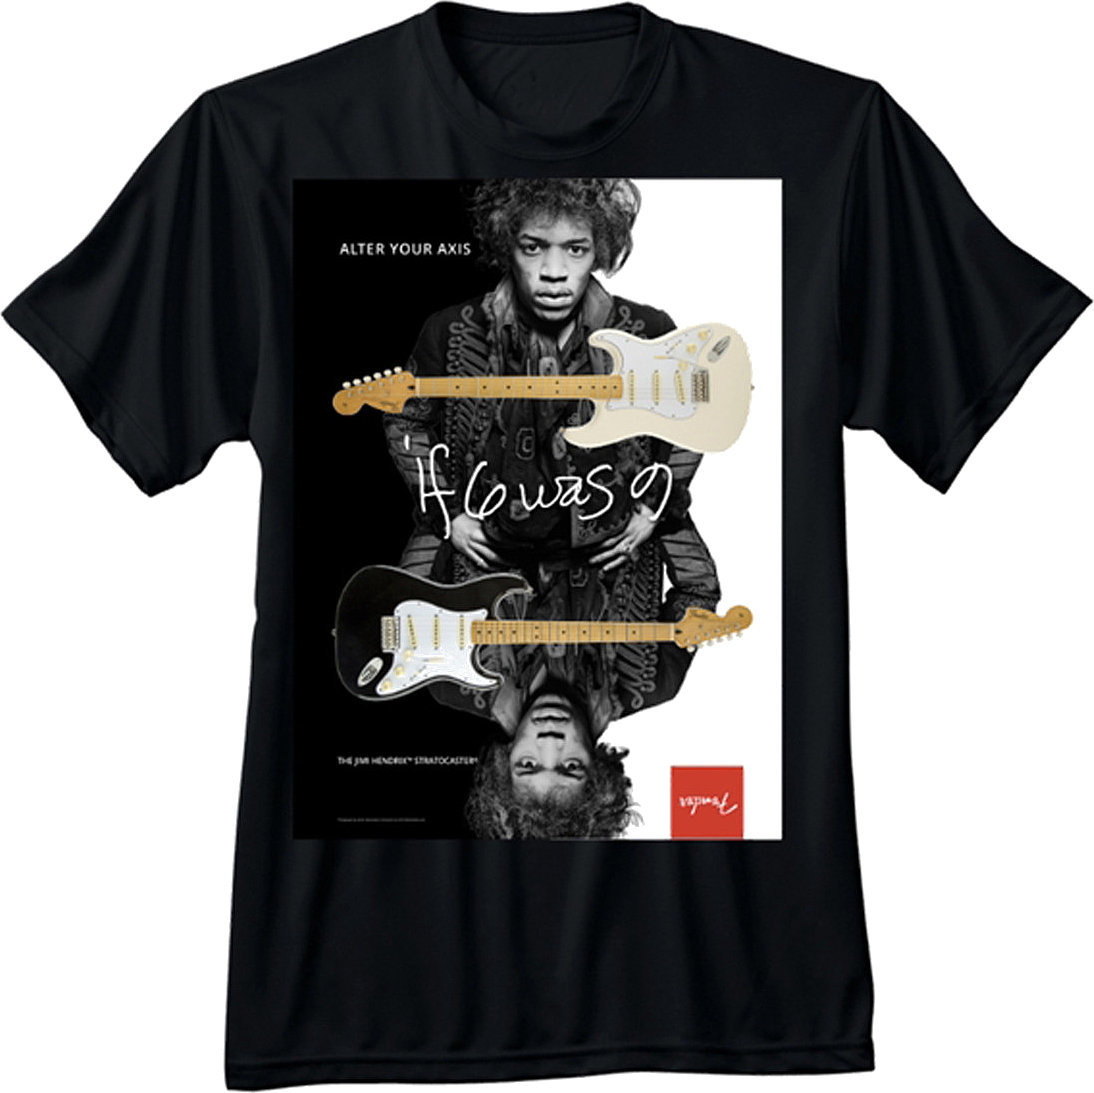 T-Shirt Fender Jimi Hendrix Collection Alter Your Axis T-Shirt Black XL